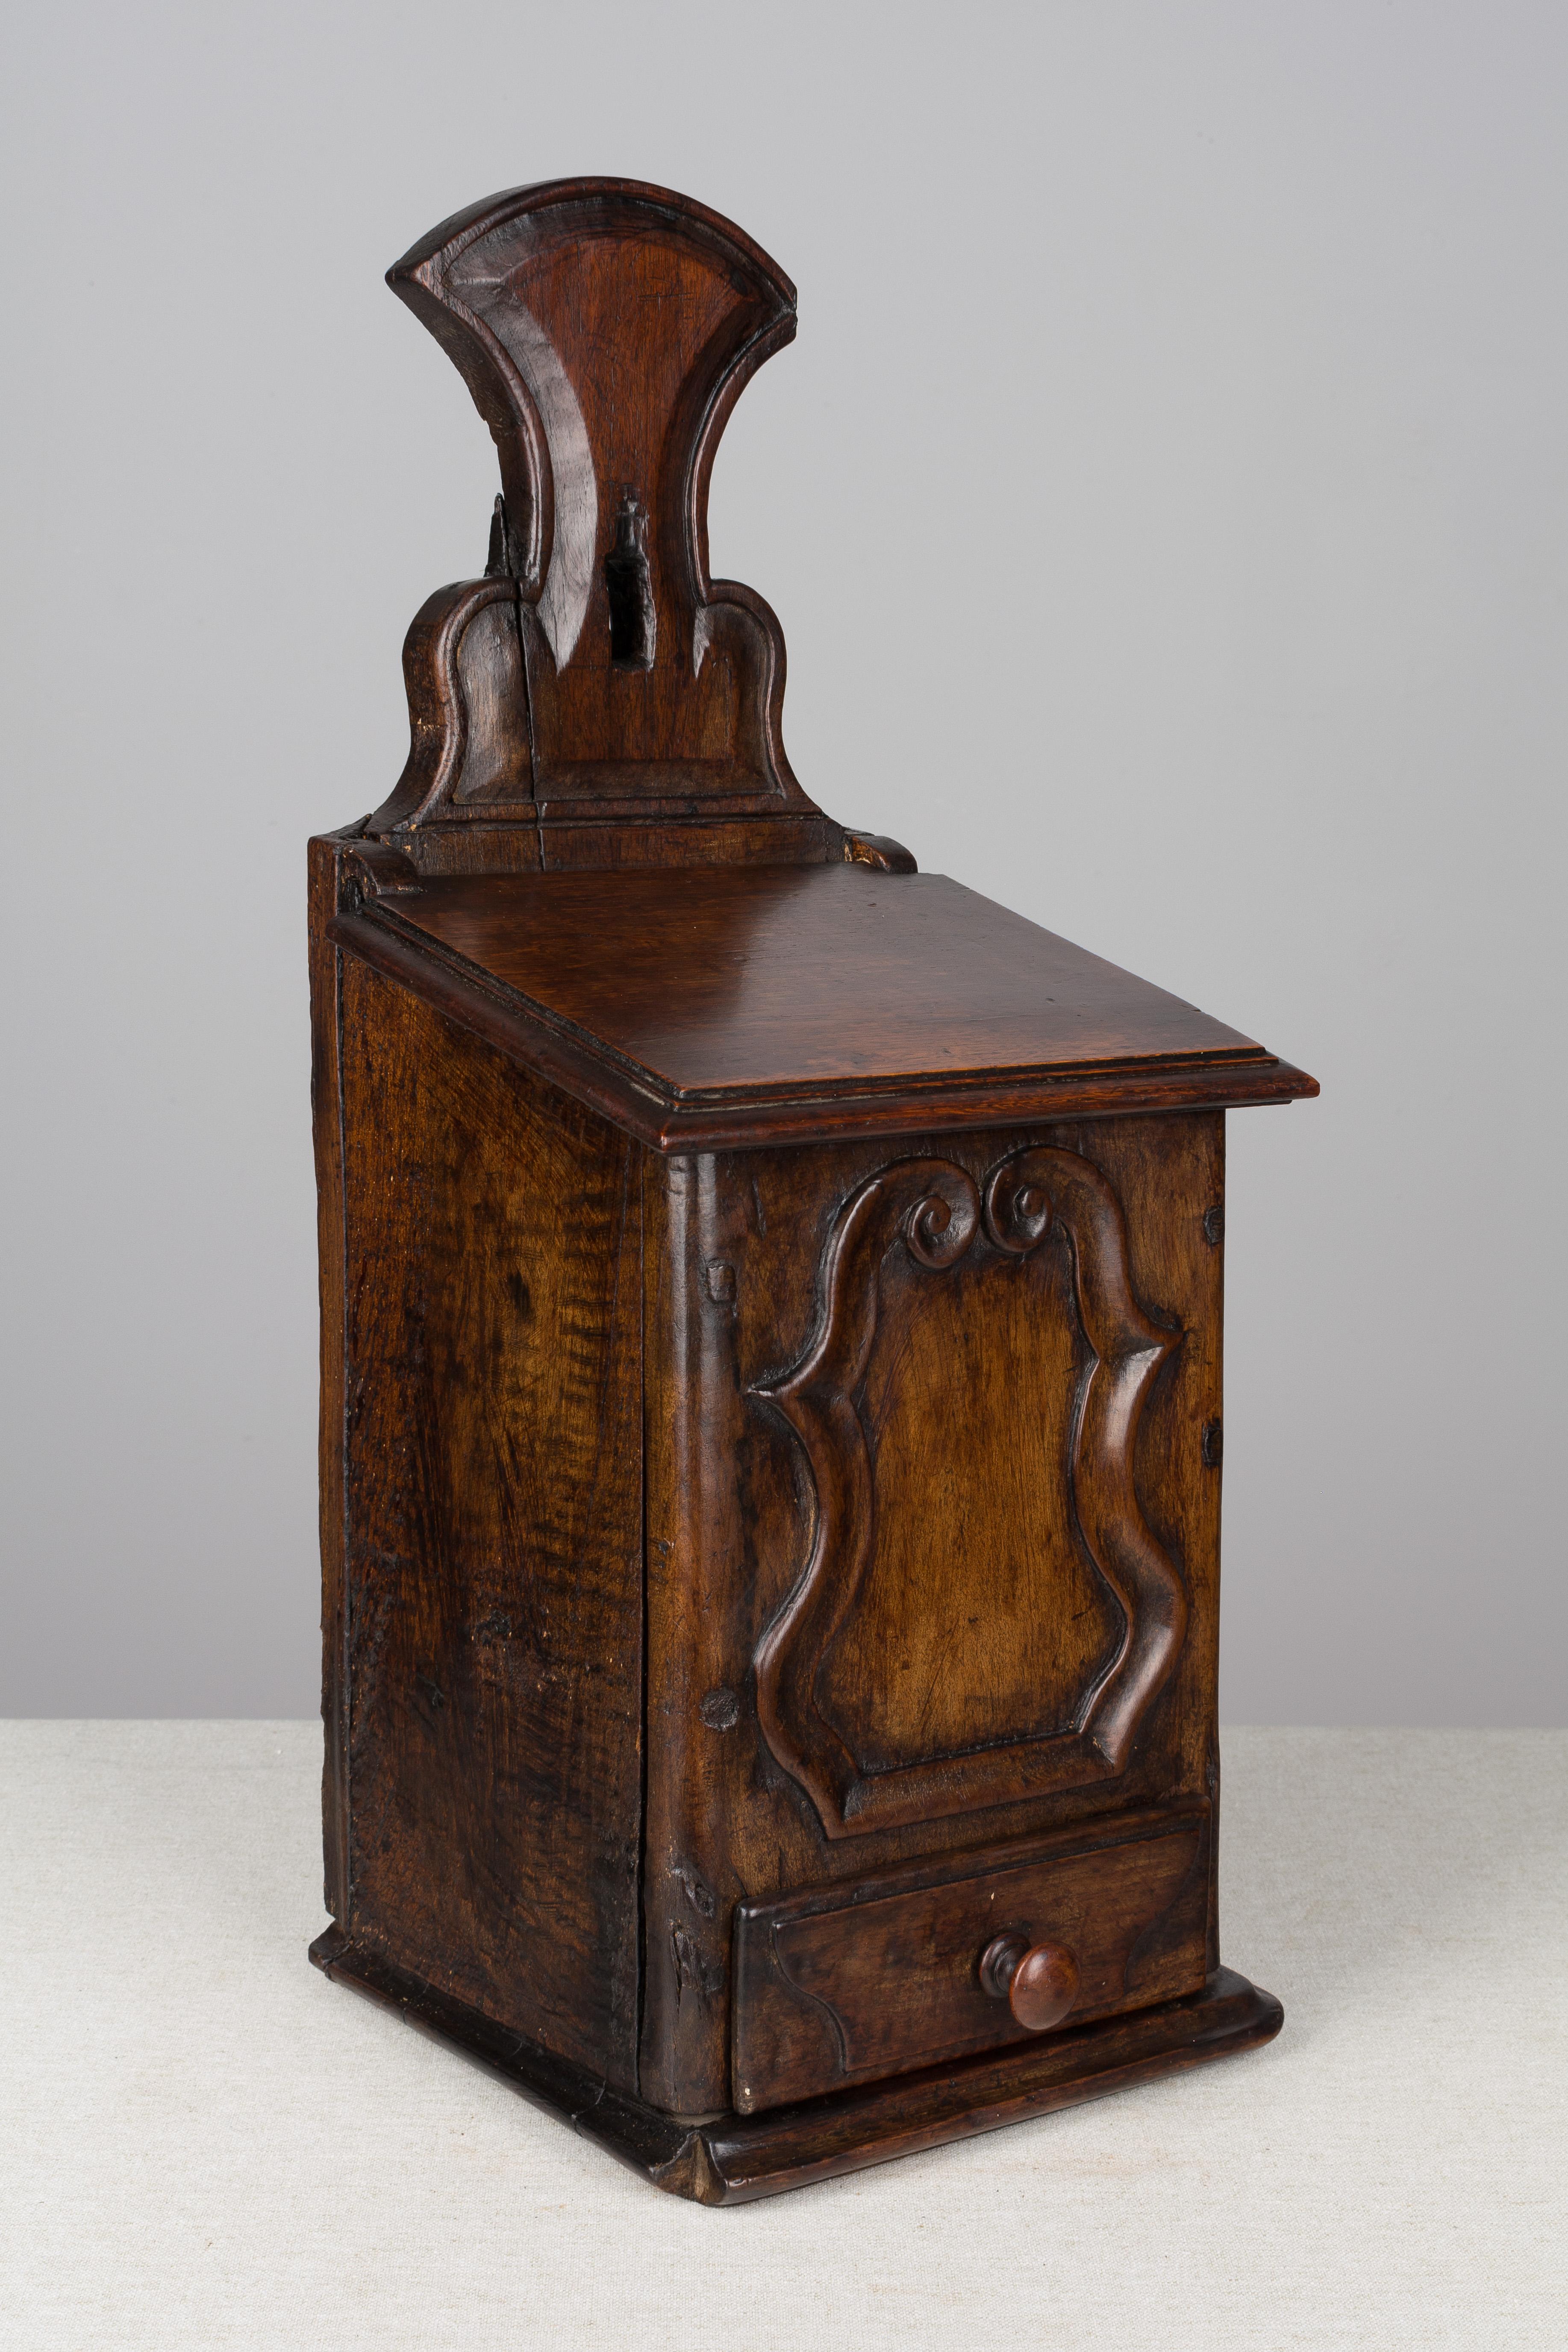 An early 19th century French boite à sel, or salt box, made of walnut with hinged lid and small drawer with turned knob. Bold hand-carved decoration. Waxed finish. Unusually large size. In very good condition with two minor losses. This box was used